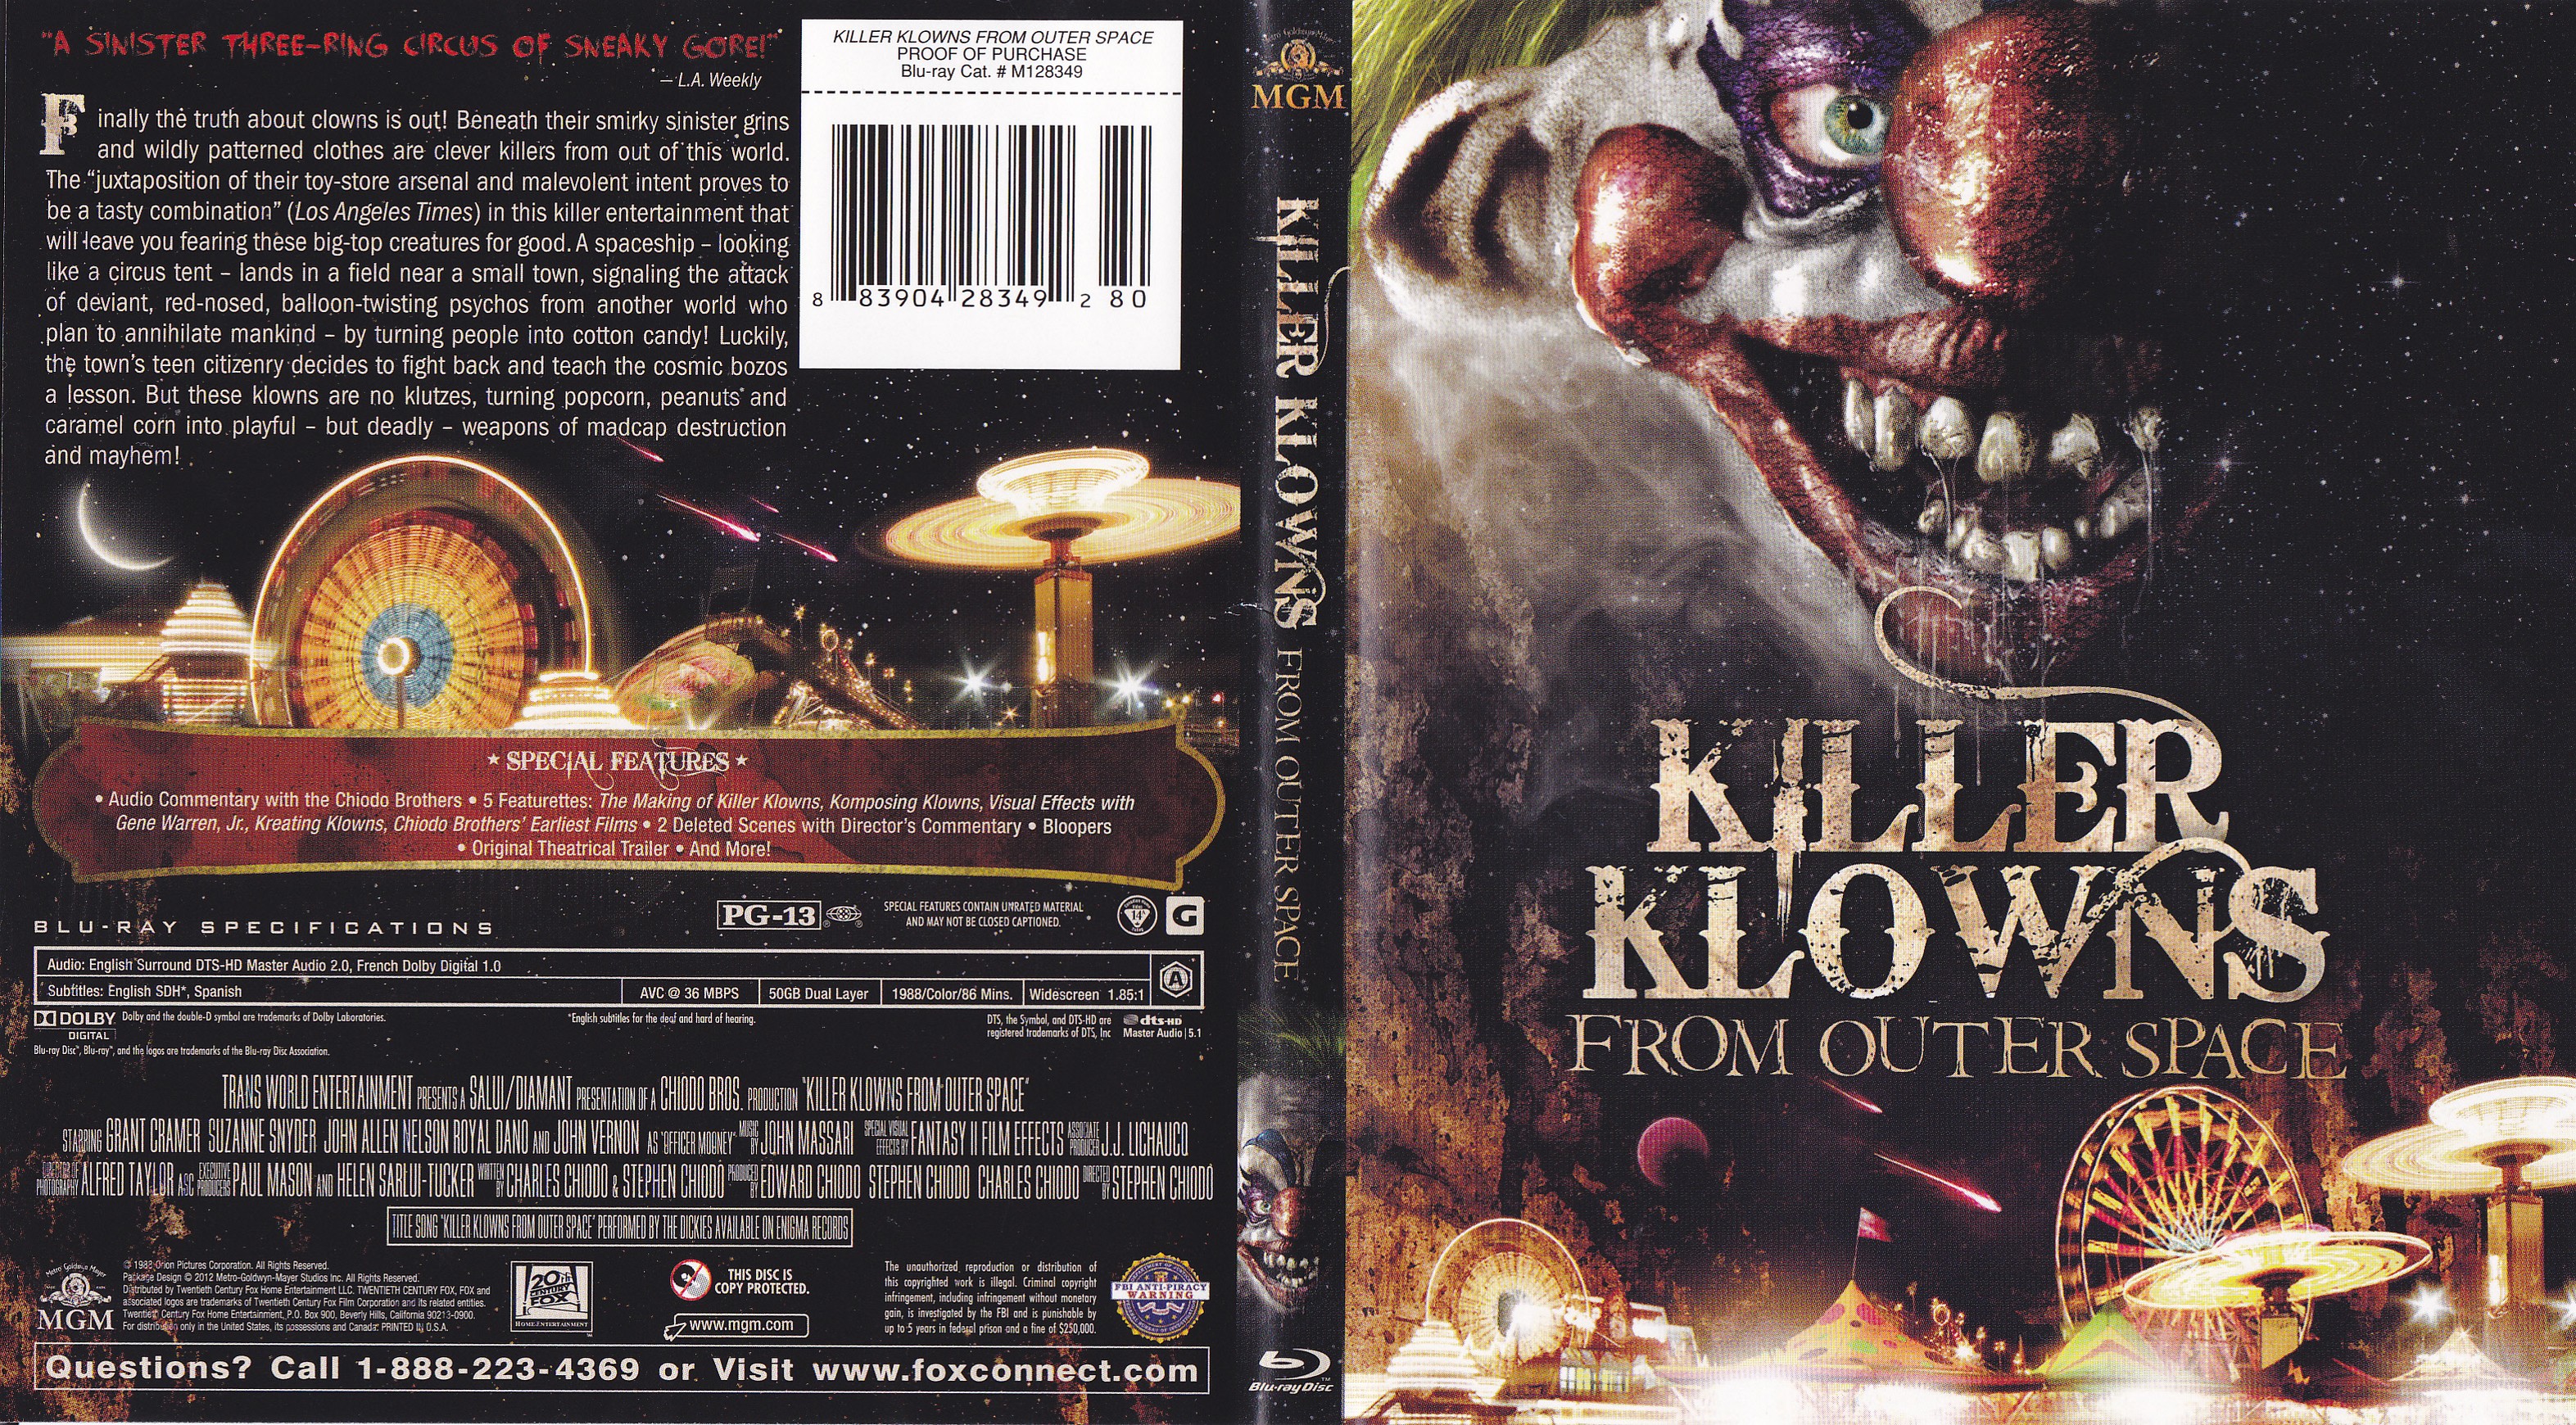 Jaquette DVD Killer klown from outer space Zone 1 (BLU-RAY)